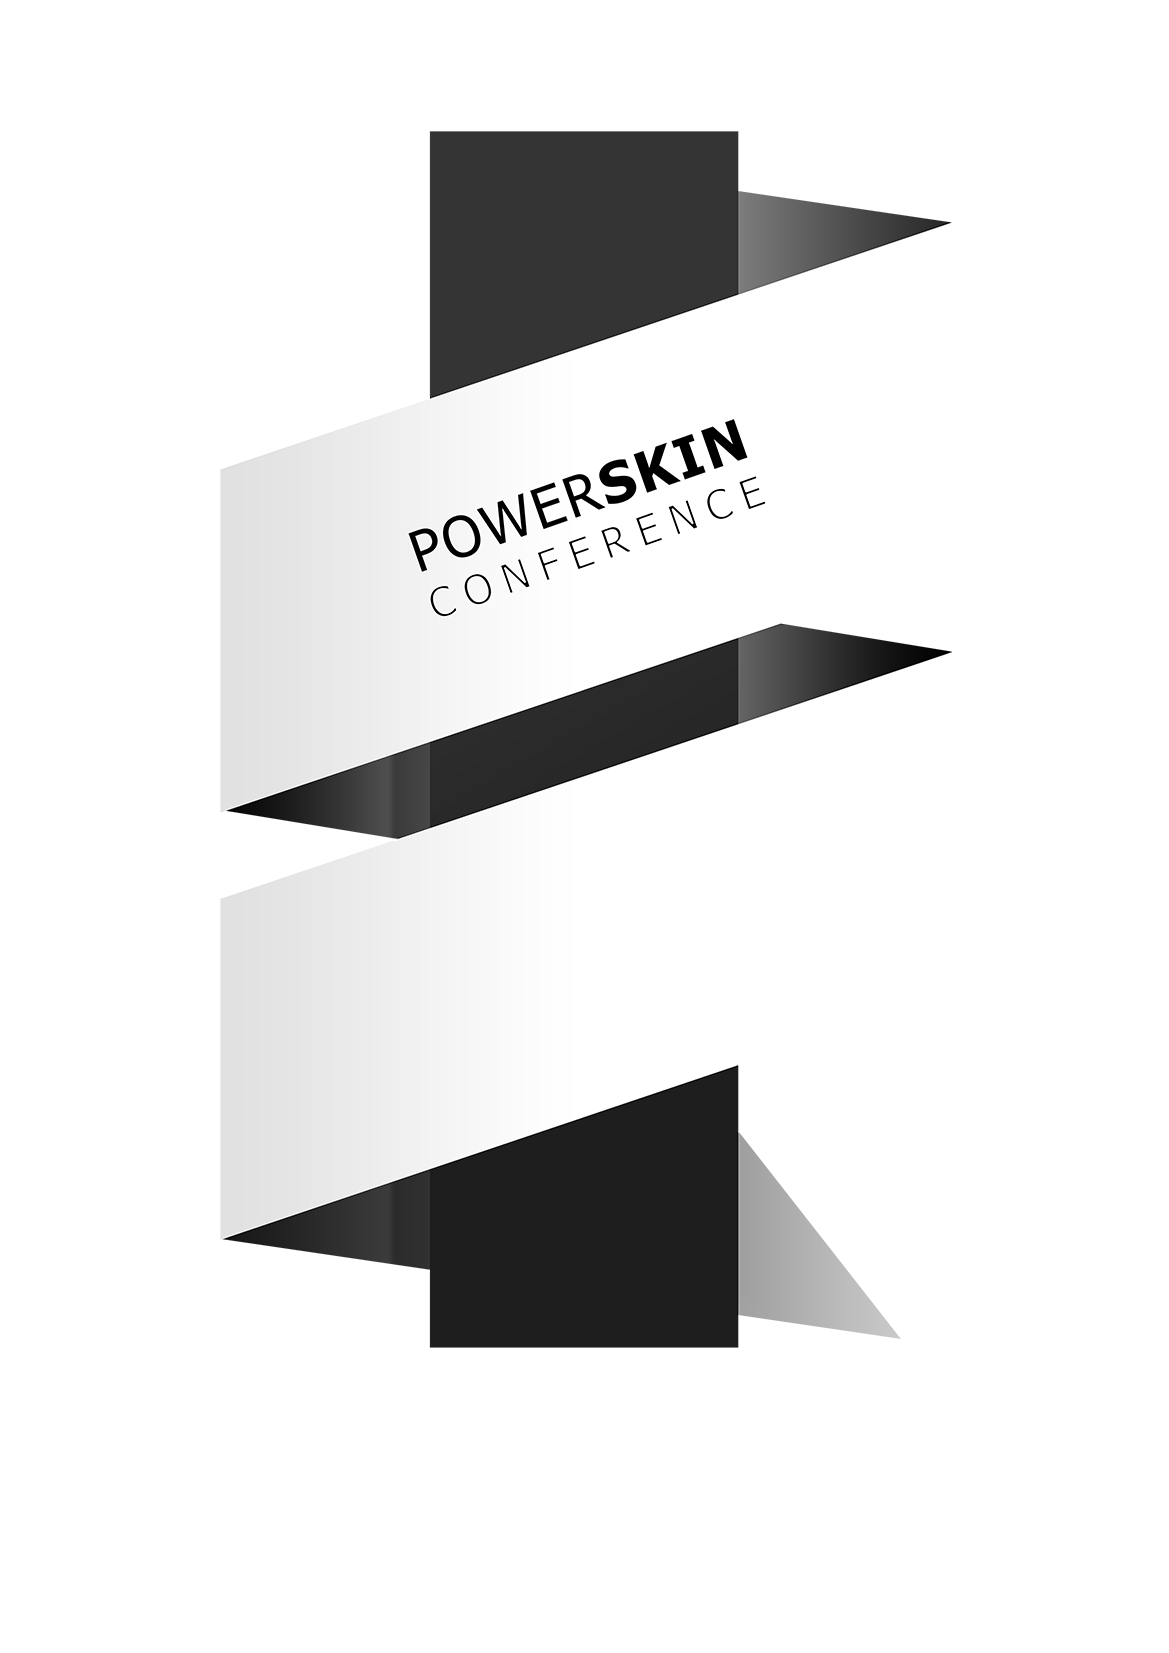 PowerSkin Conference 2019